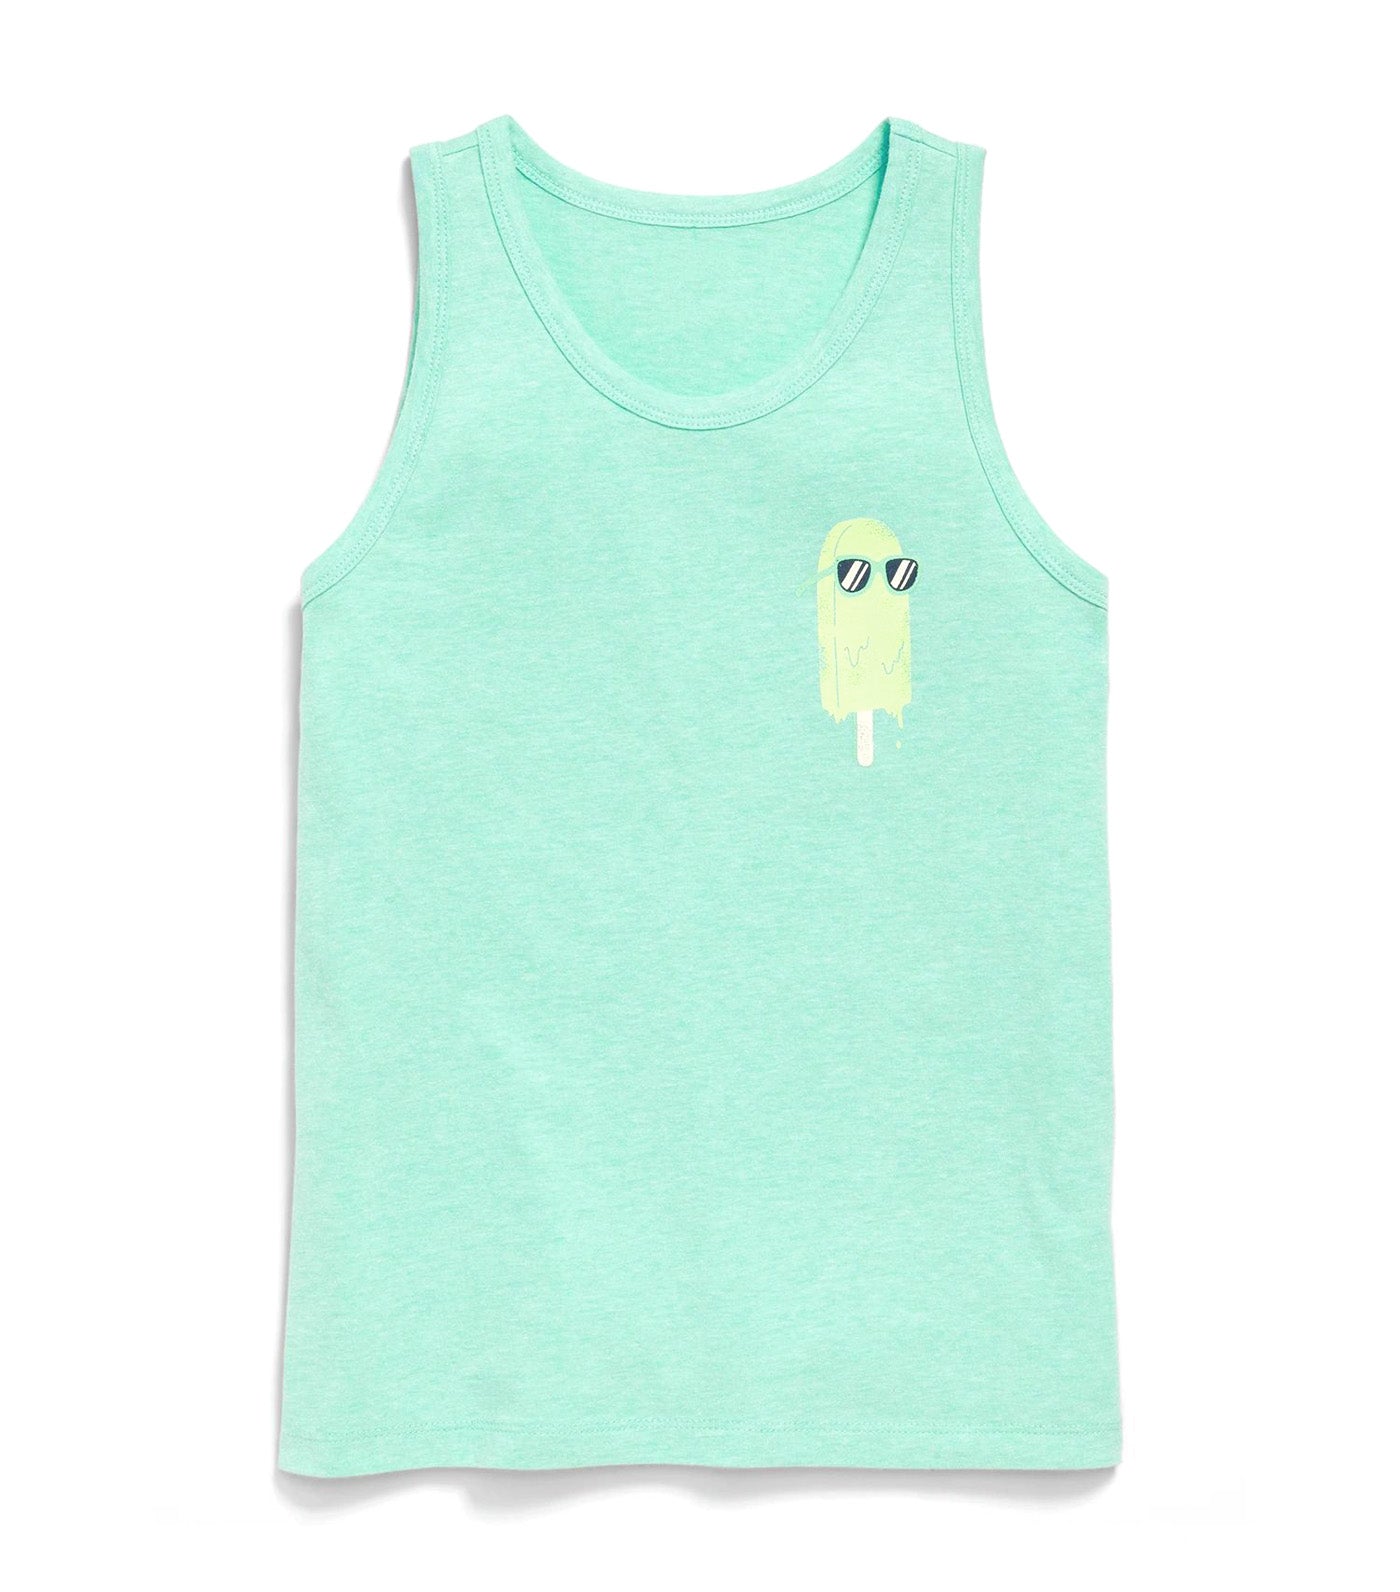 Softest Graphic Tank Top for Boys Illusion